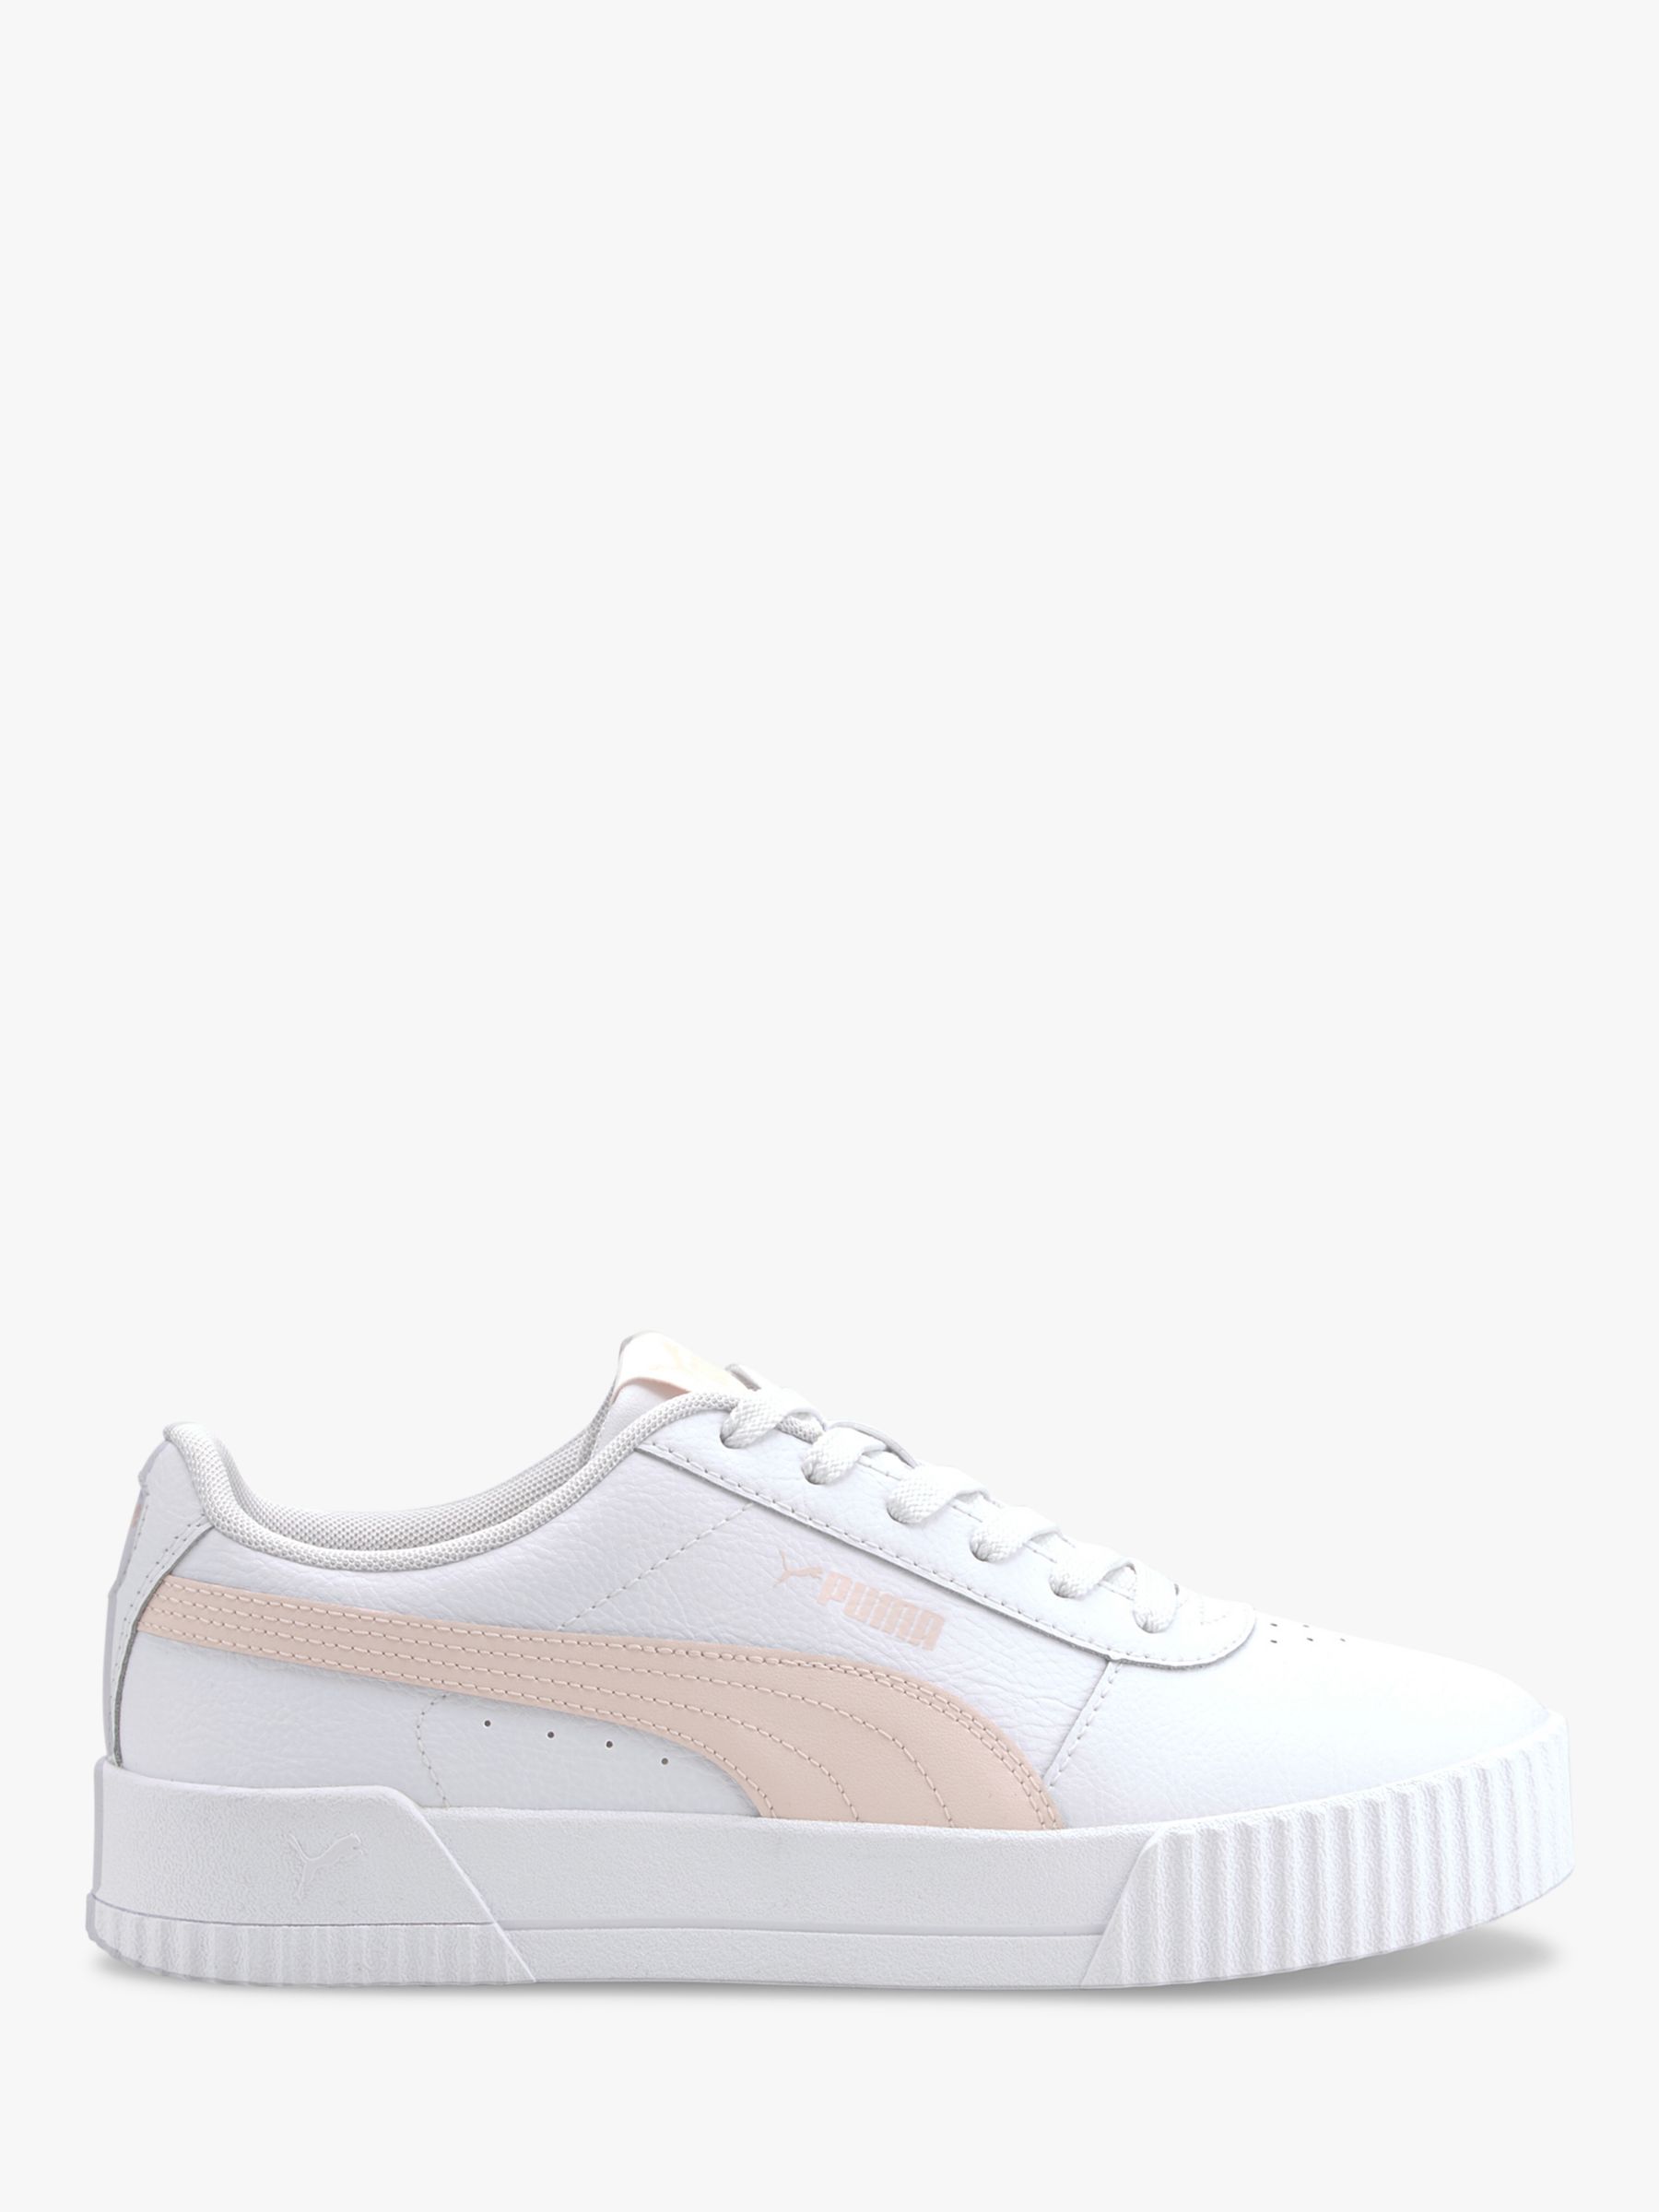 pale pink womens trainers